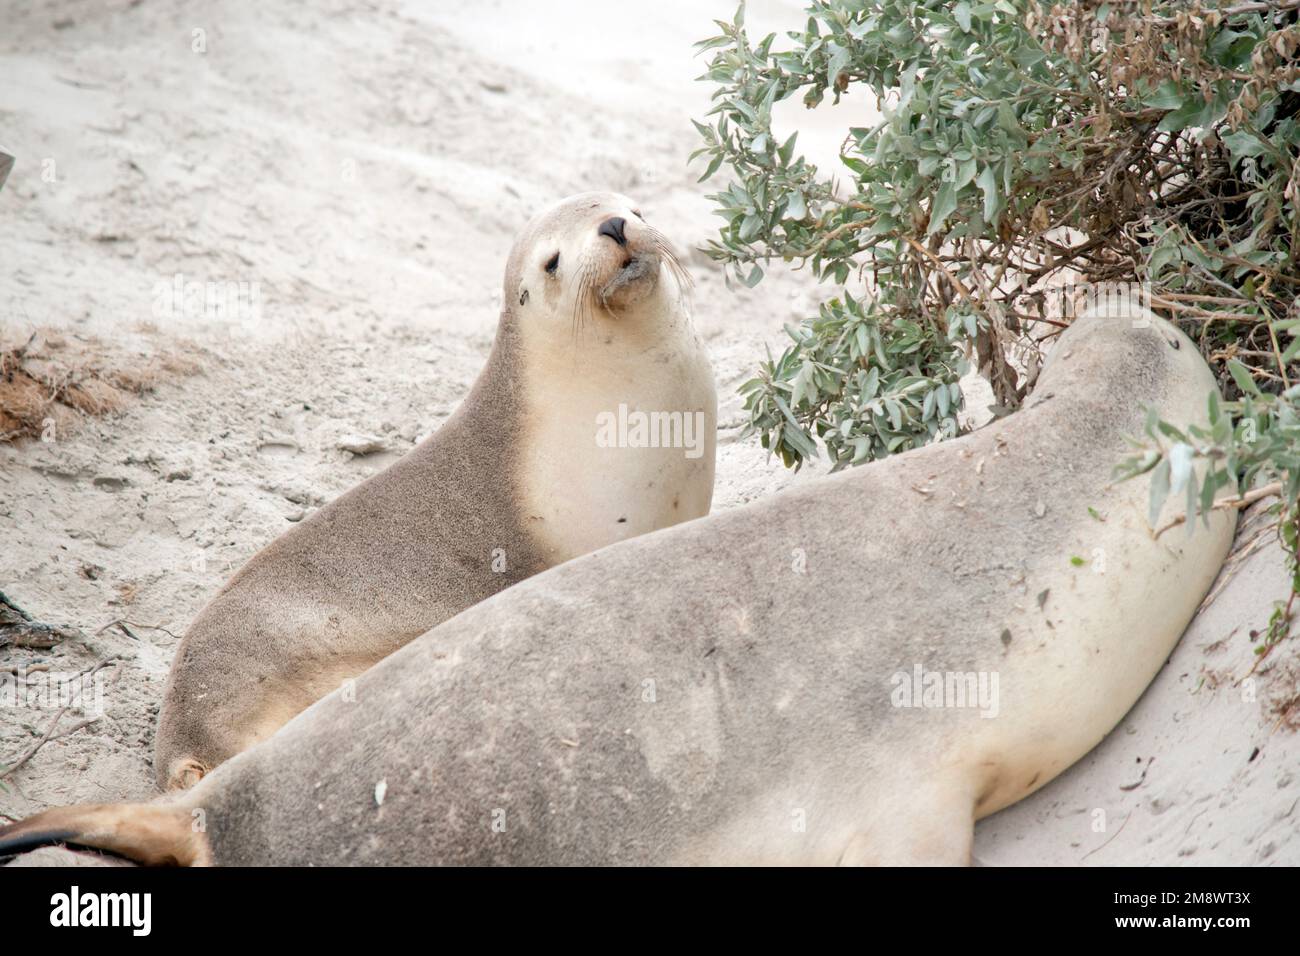 the sealion is white on the bottom and grey on top Stock Photo